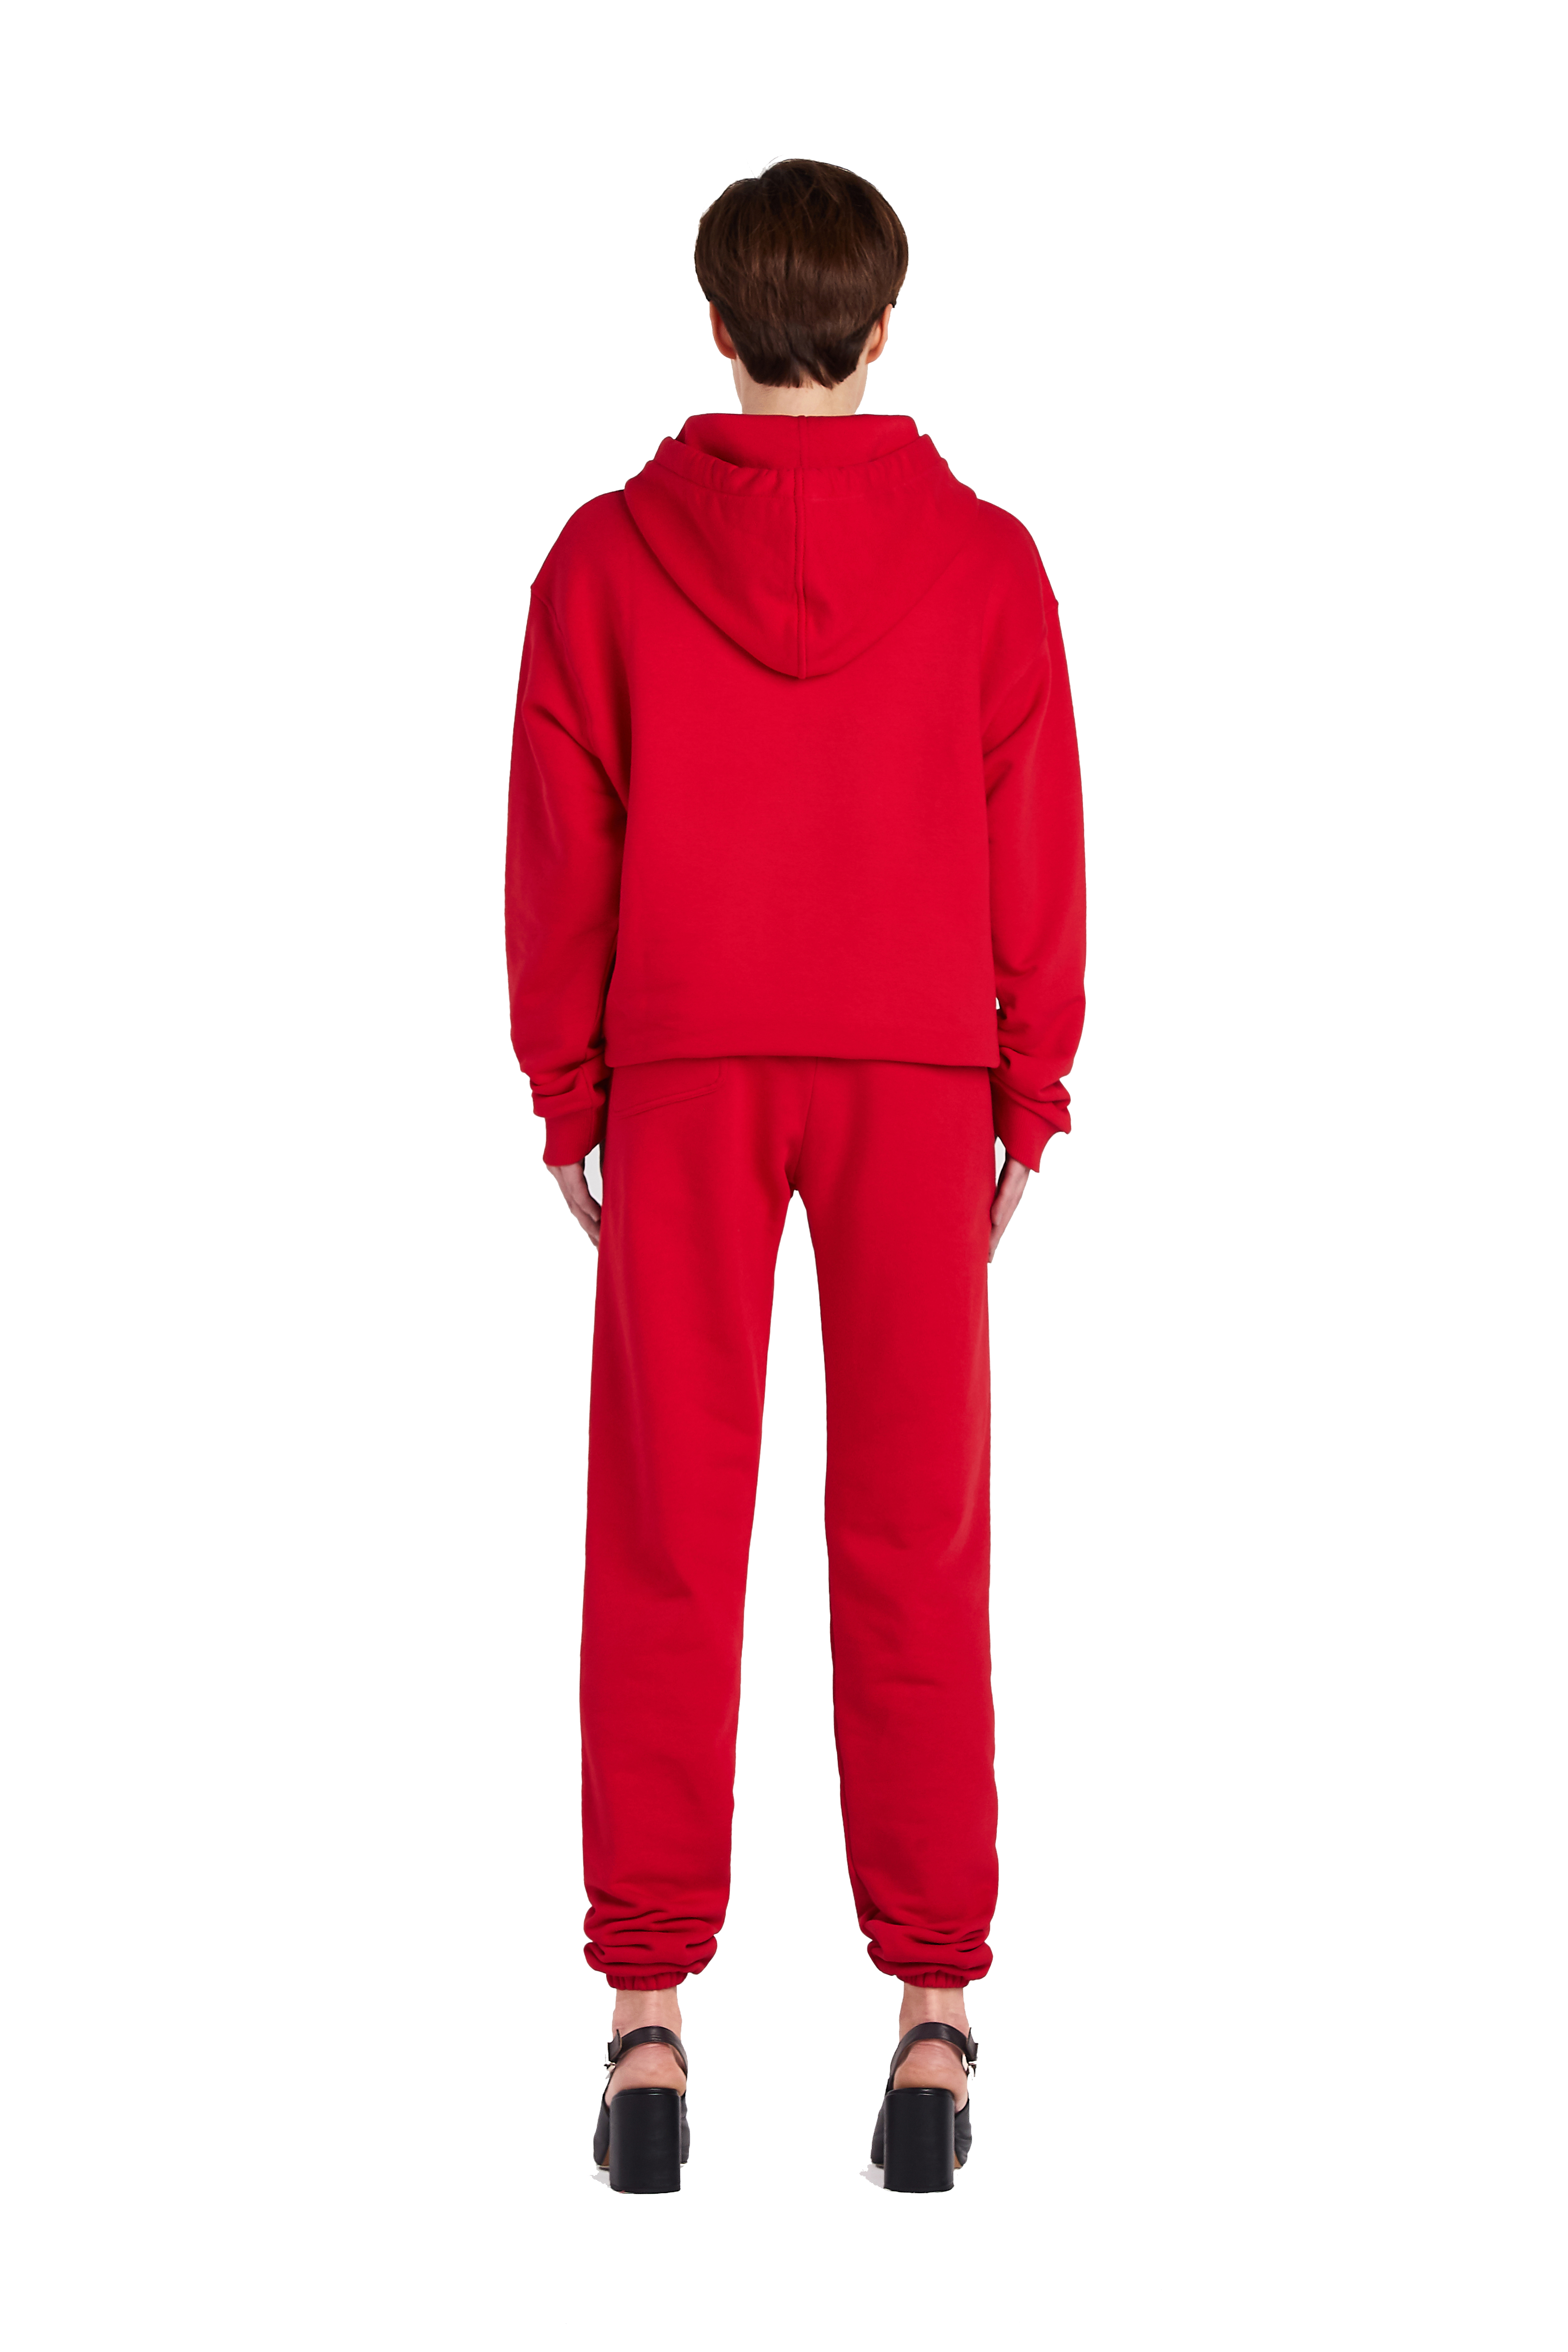 Red hoodie FOR RAVE USE ONLY